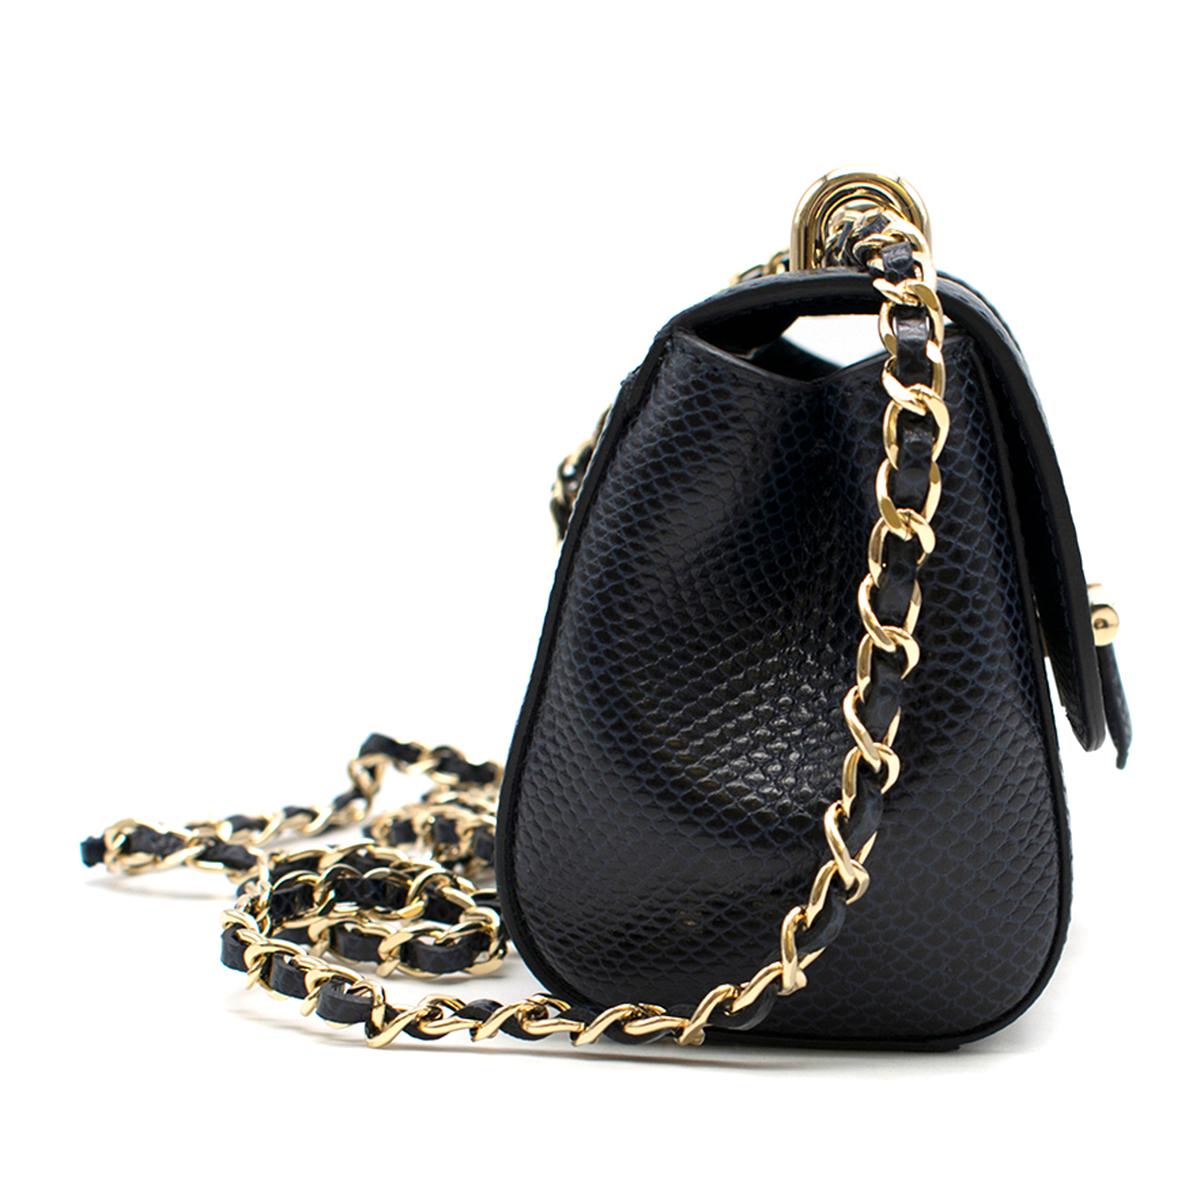 Aspinal of London Navy Reptile-effect Micro Lottie Bag

- Navy leather micro bag
- Reptile-effect leather
- Signature letterbox lock closure
- Leather plaited metal chain for shoulder and cross-body styling
- Grosgrain lined interior
- Interior